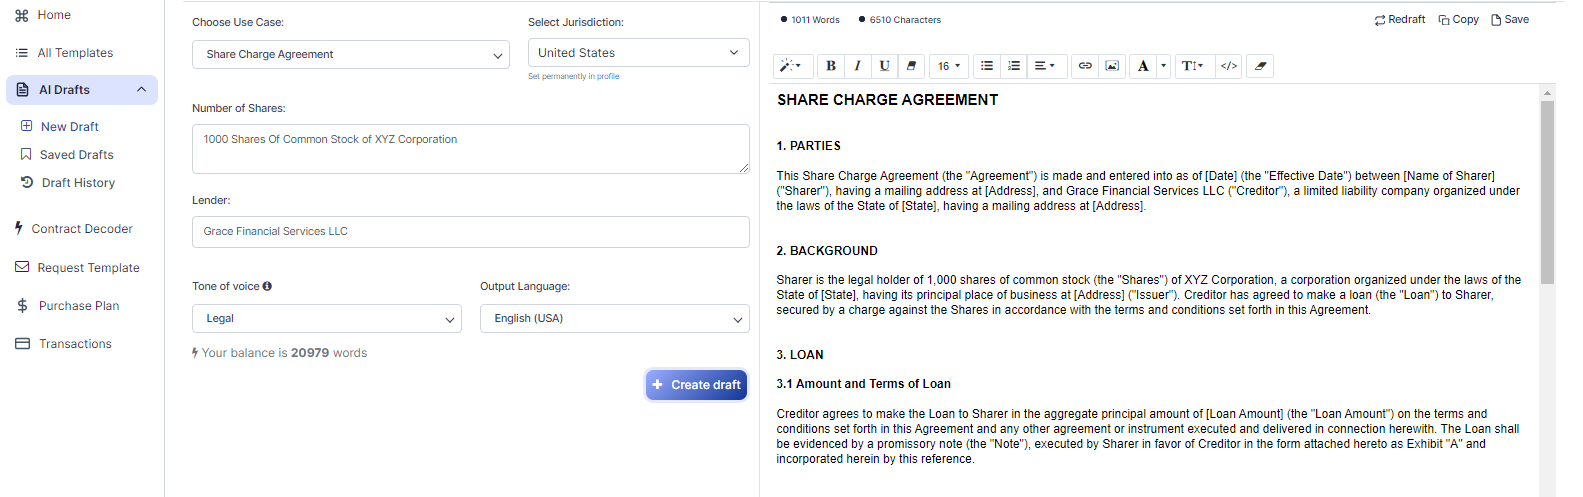 Share Charge Agreement template